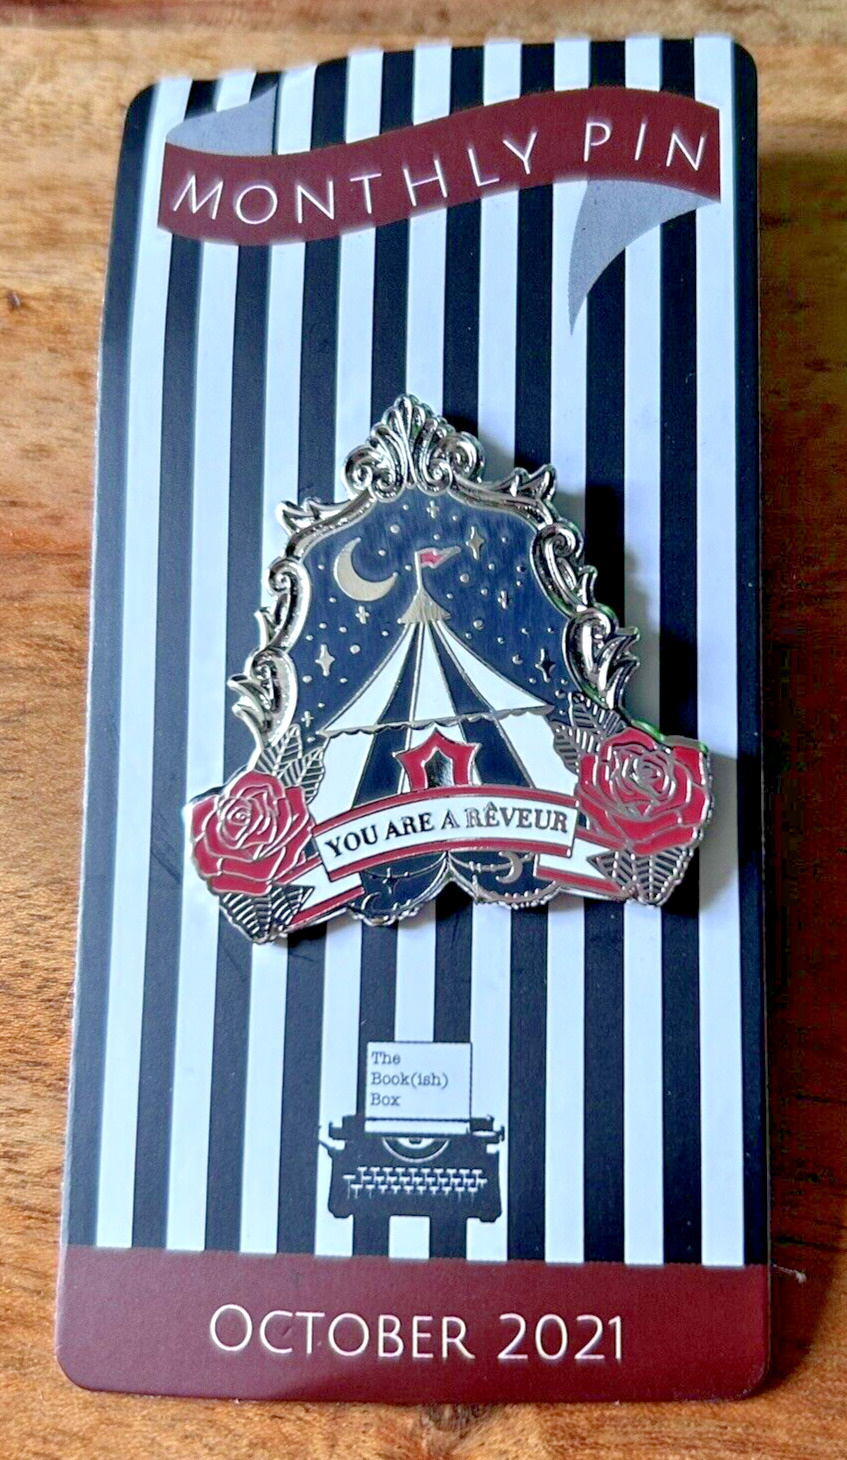 The Bookish Box You are a Reveur Night Circus Erin Morgenstern October 2021 NEW